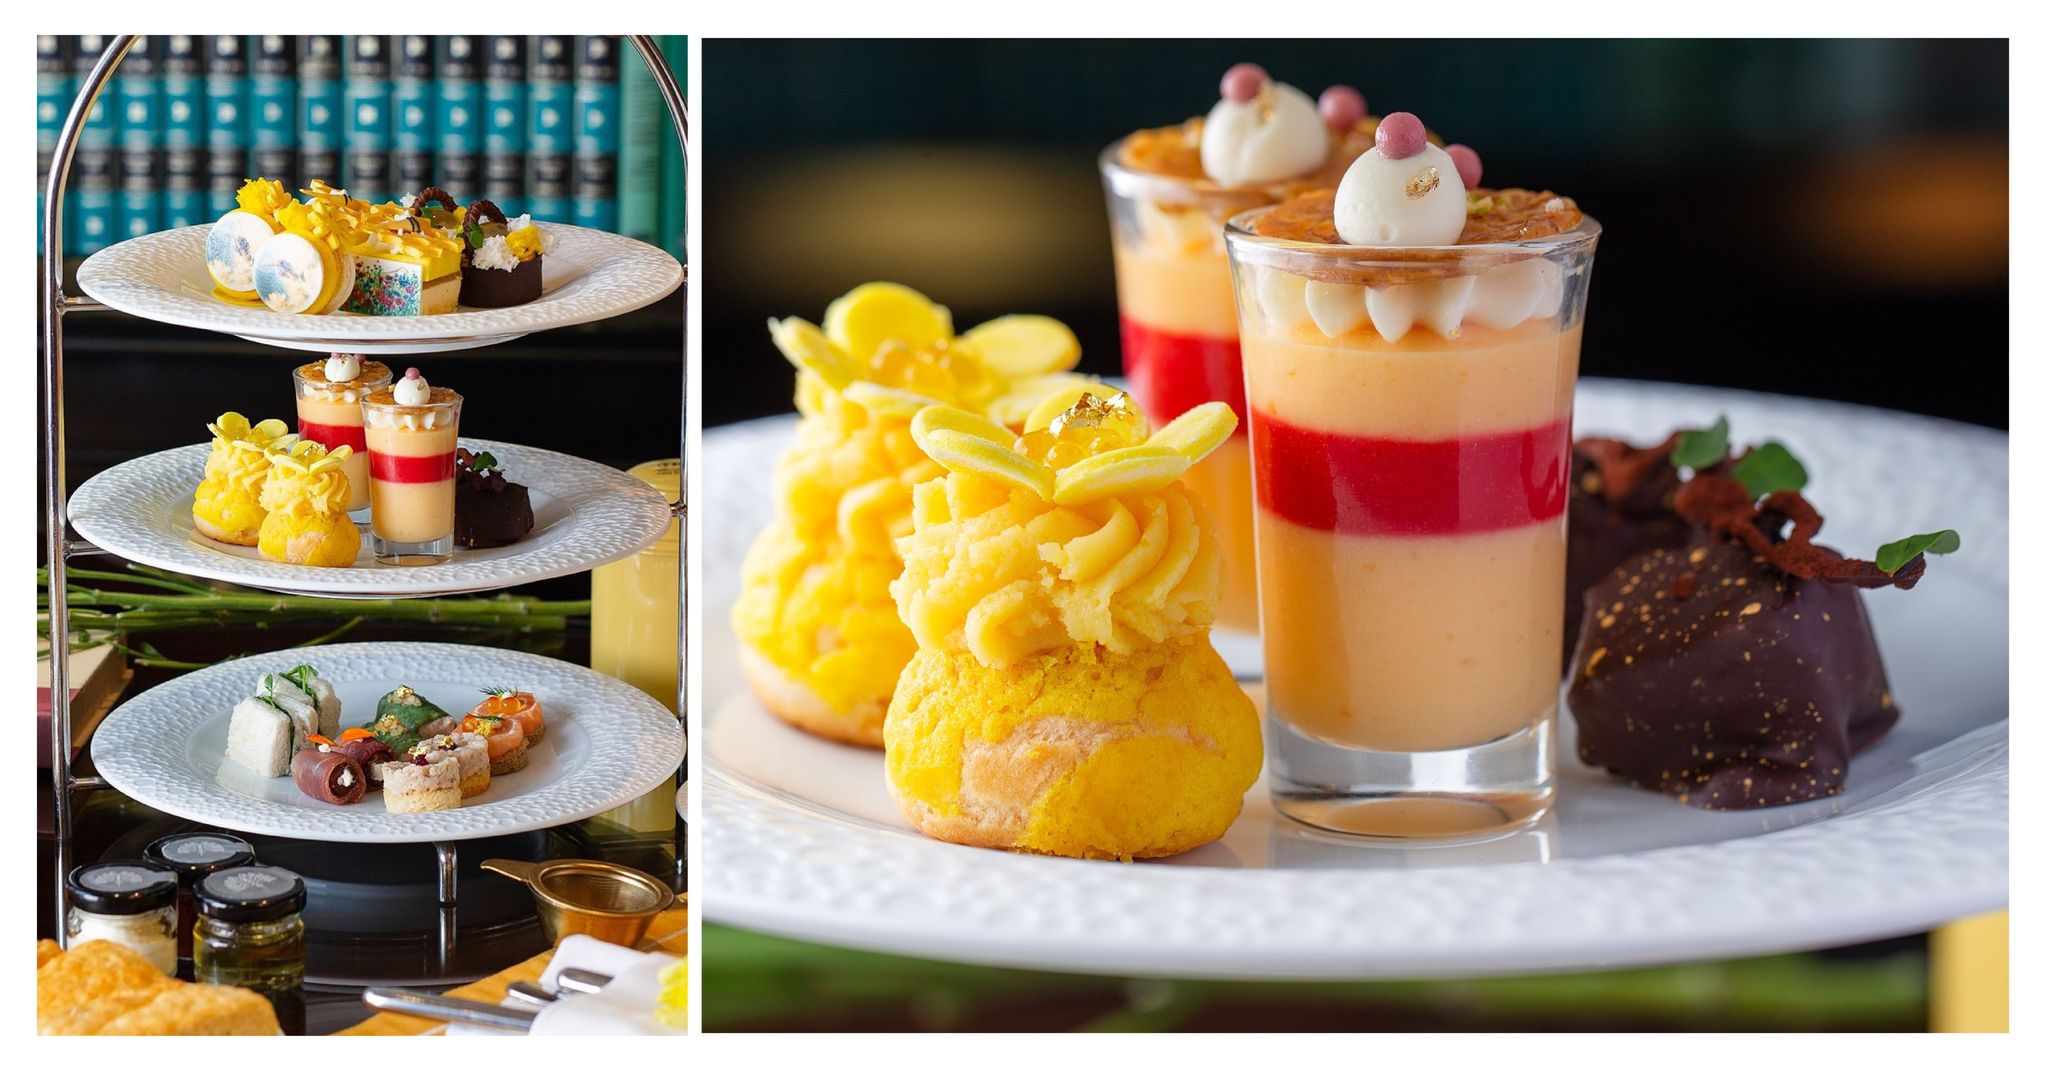 Enjoy the authentic taste of honey and afternoon tea at this premier hotel bar in Makati